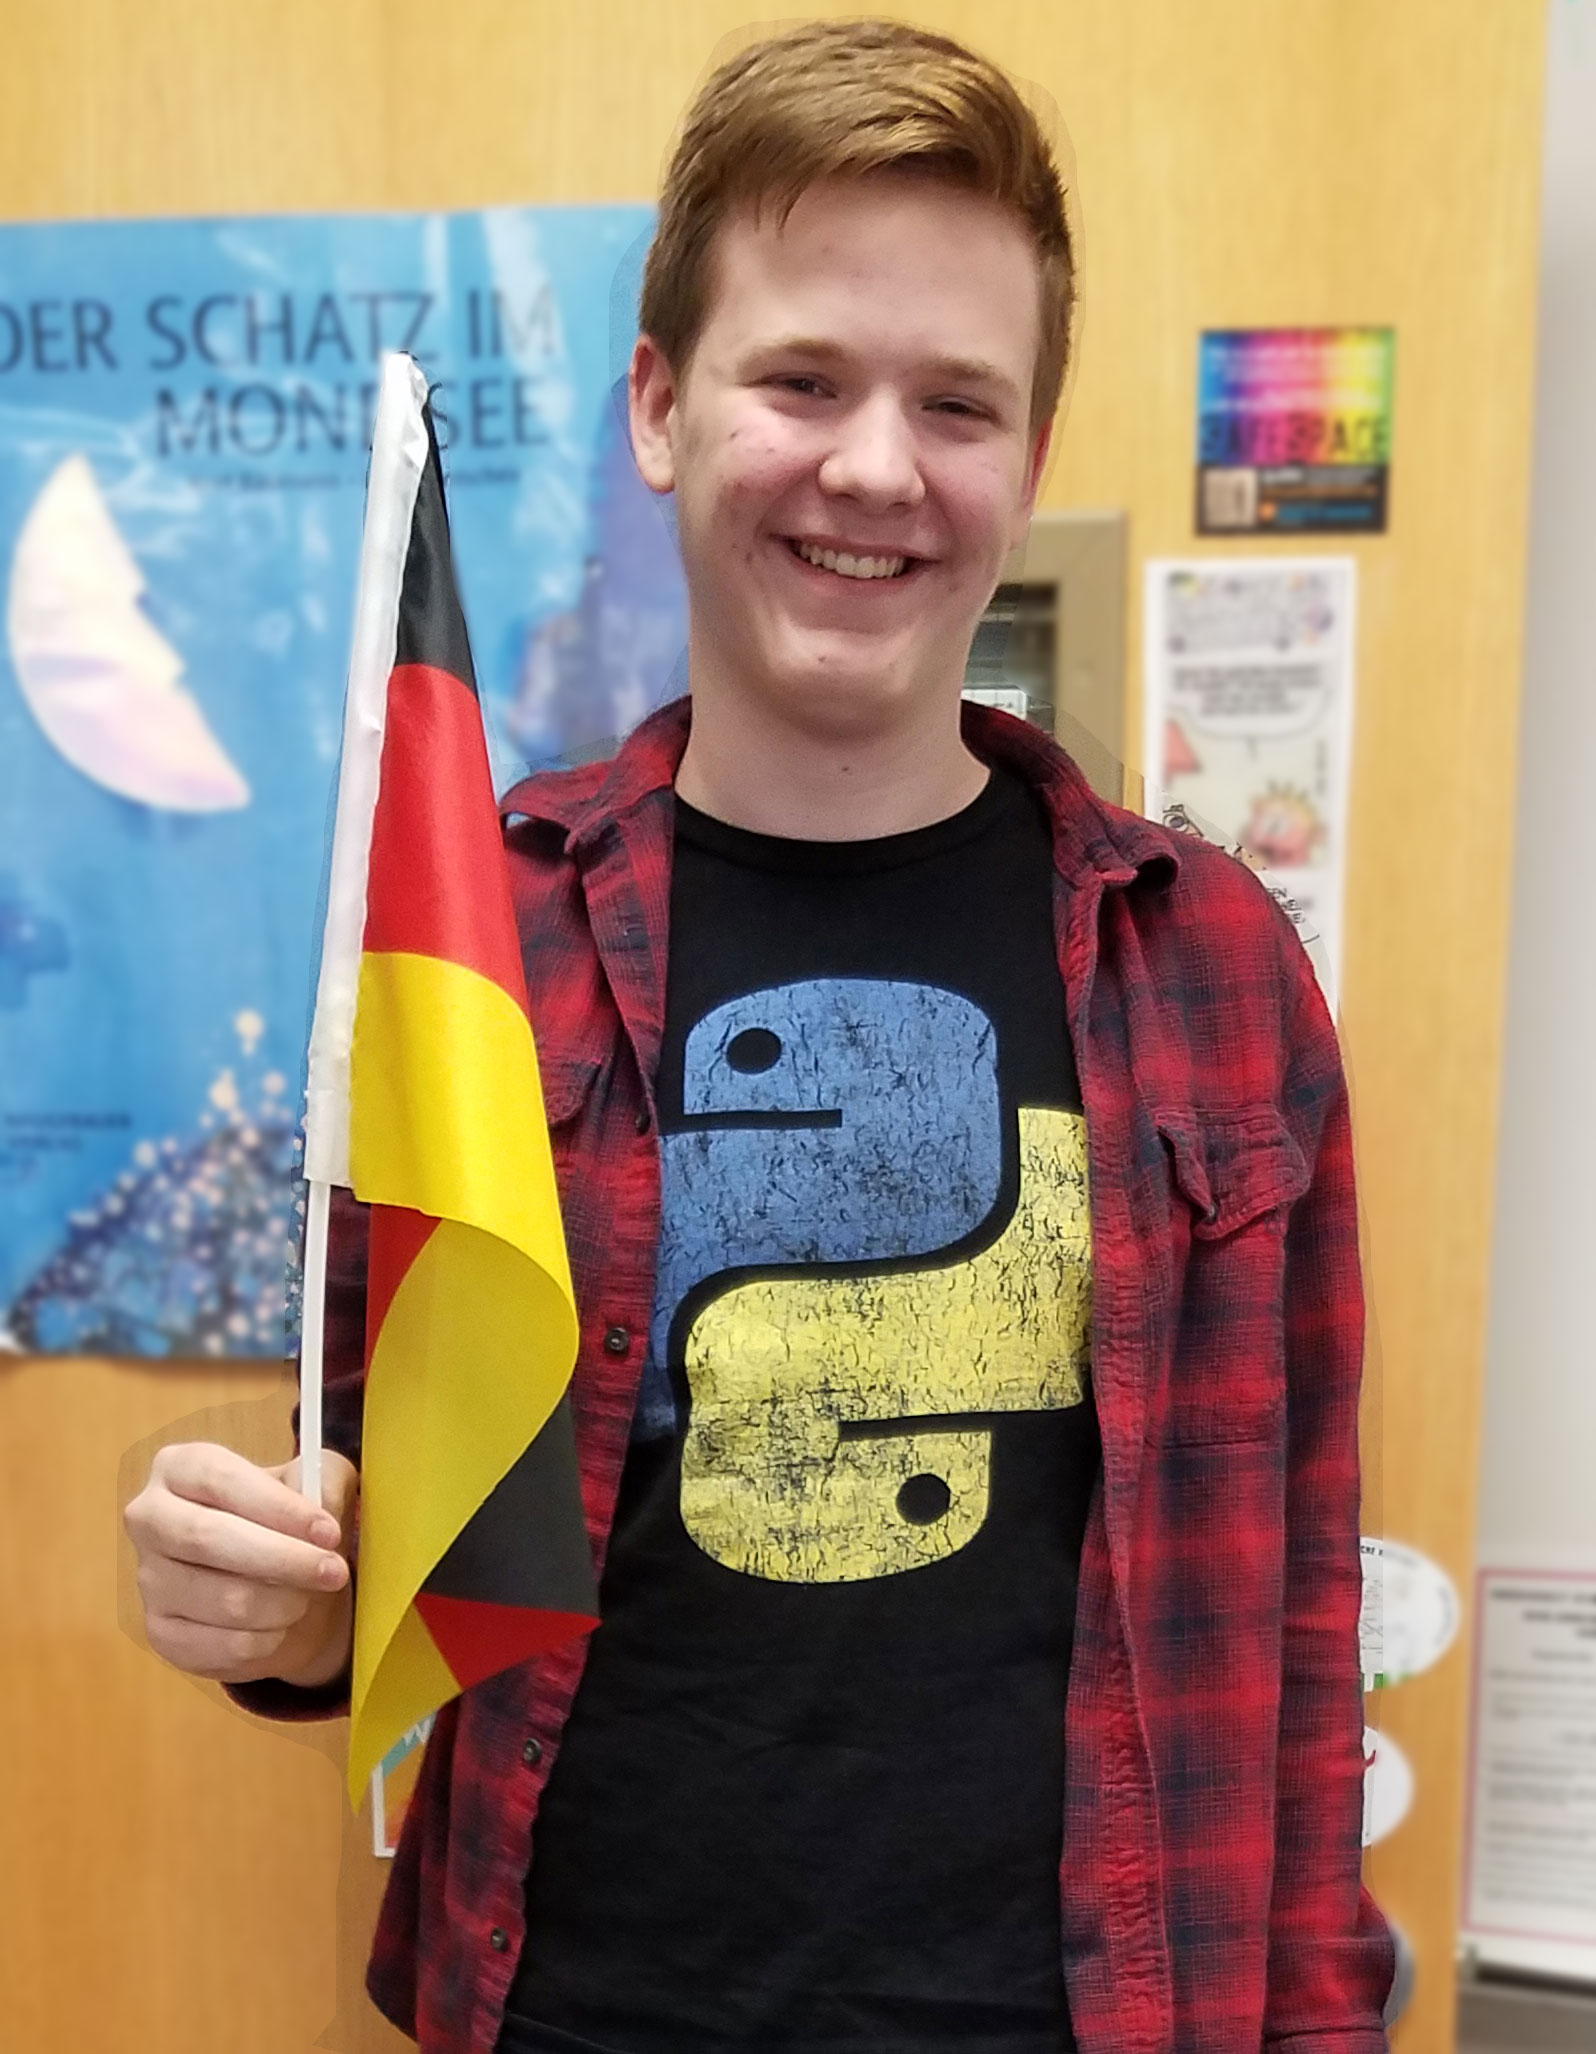 This is an image of Daniel Popp holding a German flag